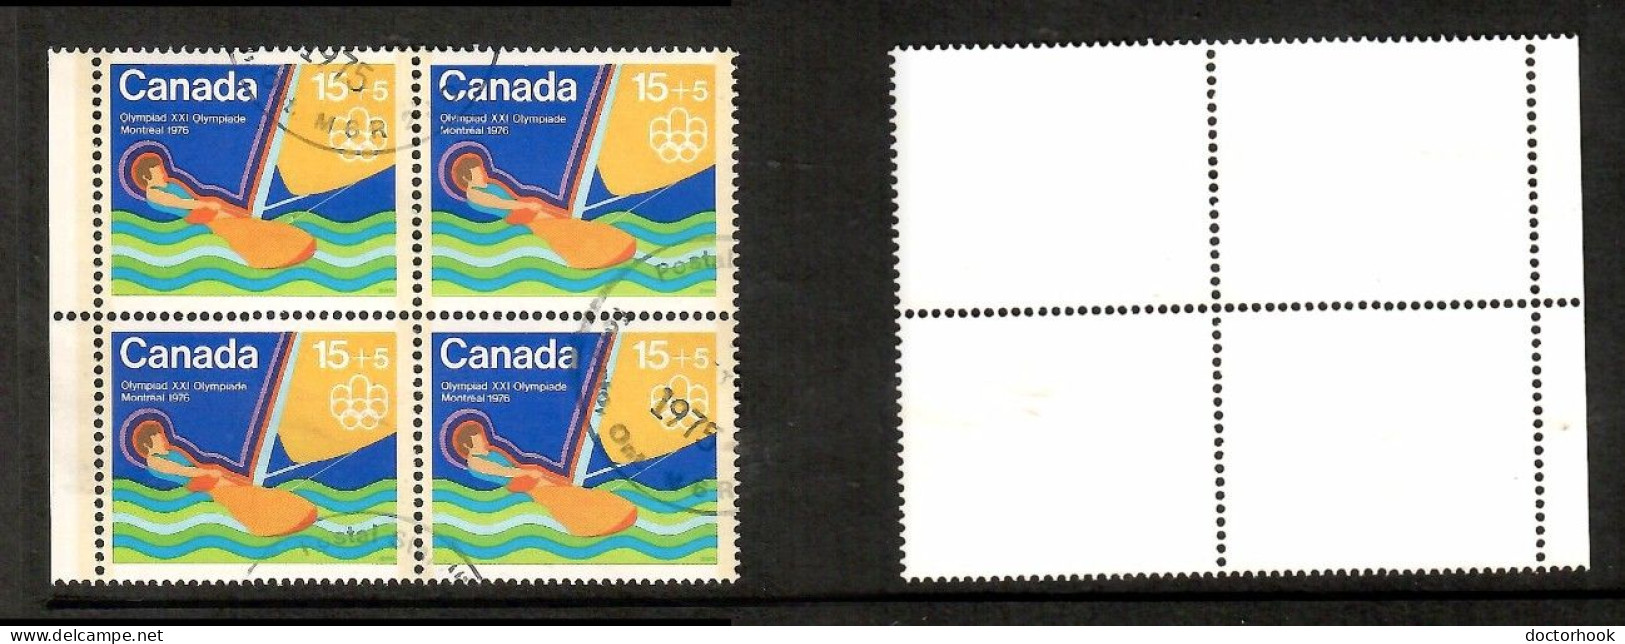 CANADA   Scott # B 6 USED BLOCK Of 4 (CONDITION AS PER SCAN) (CAN-211) - Blocs-feuillets